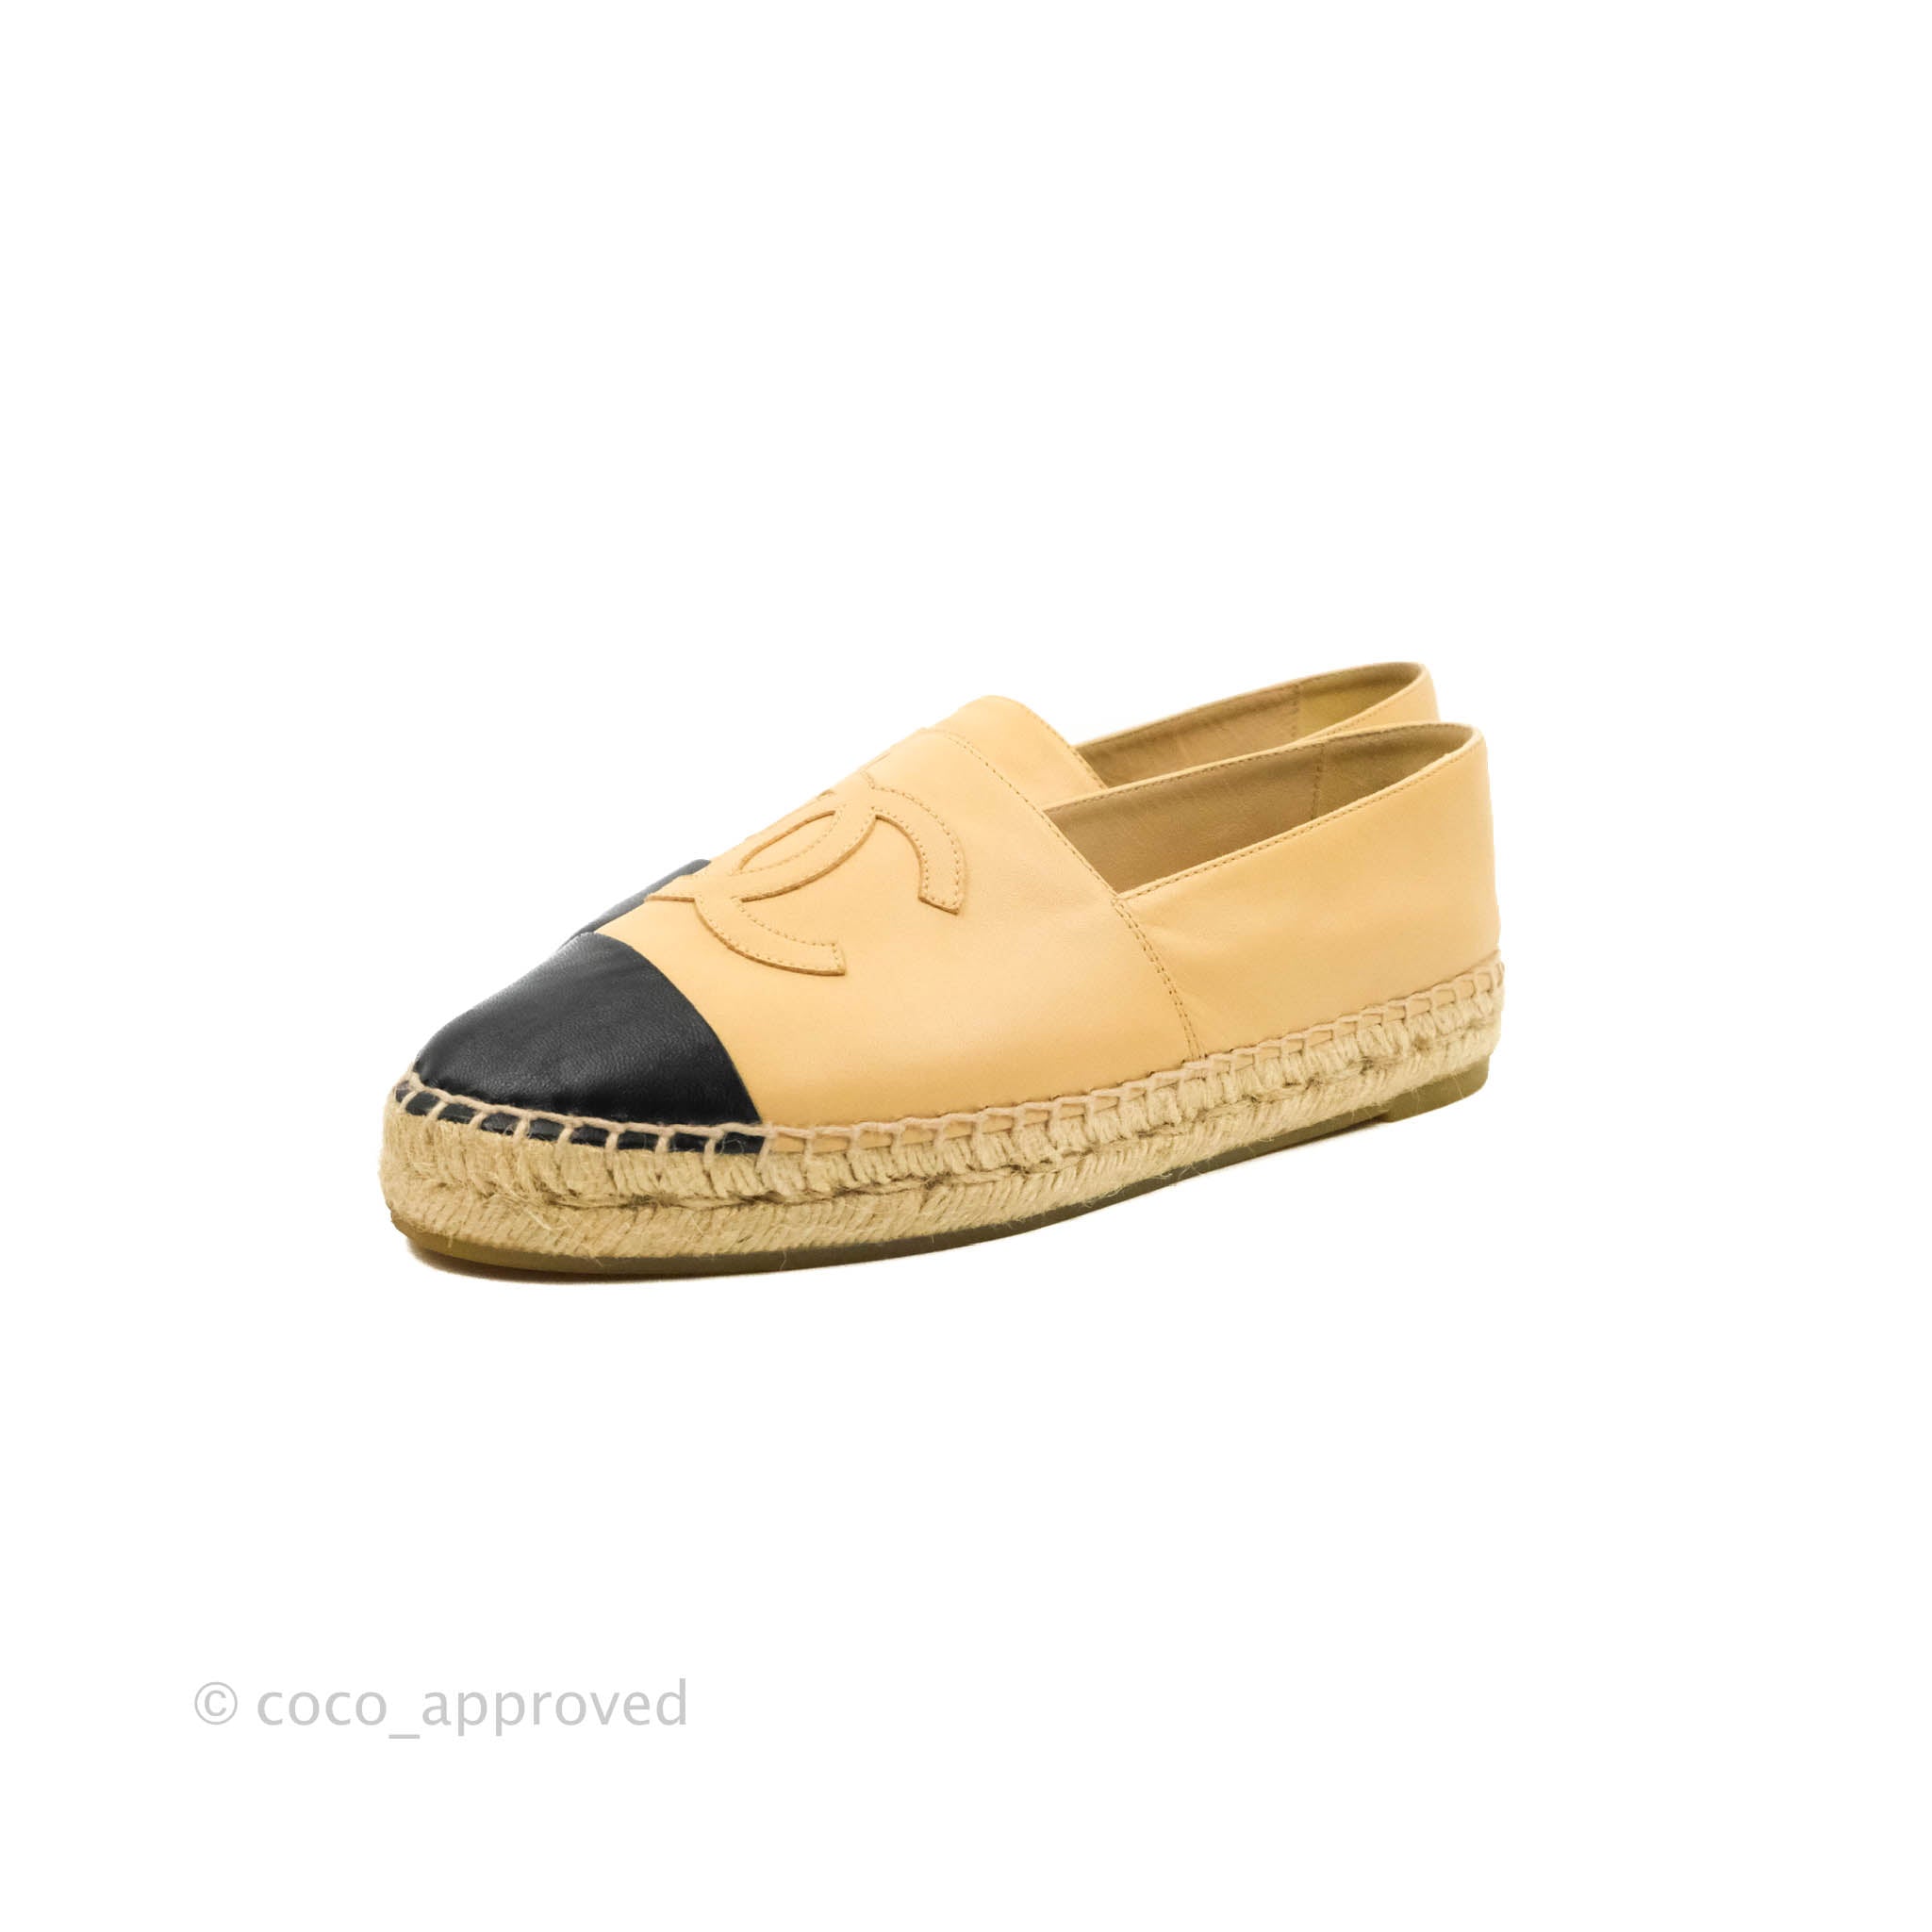 Chanel Shoes Espadrilles, Beige and Black Canvas, Size 37, New in Dustbag  WA001